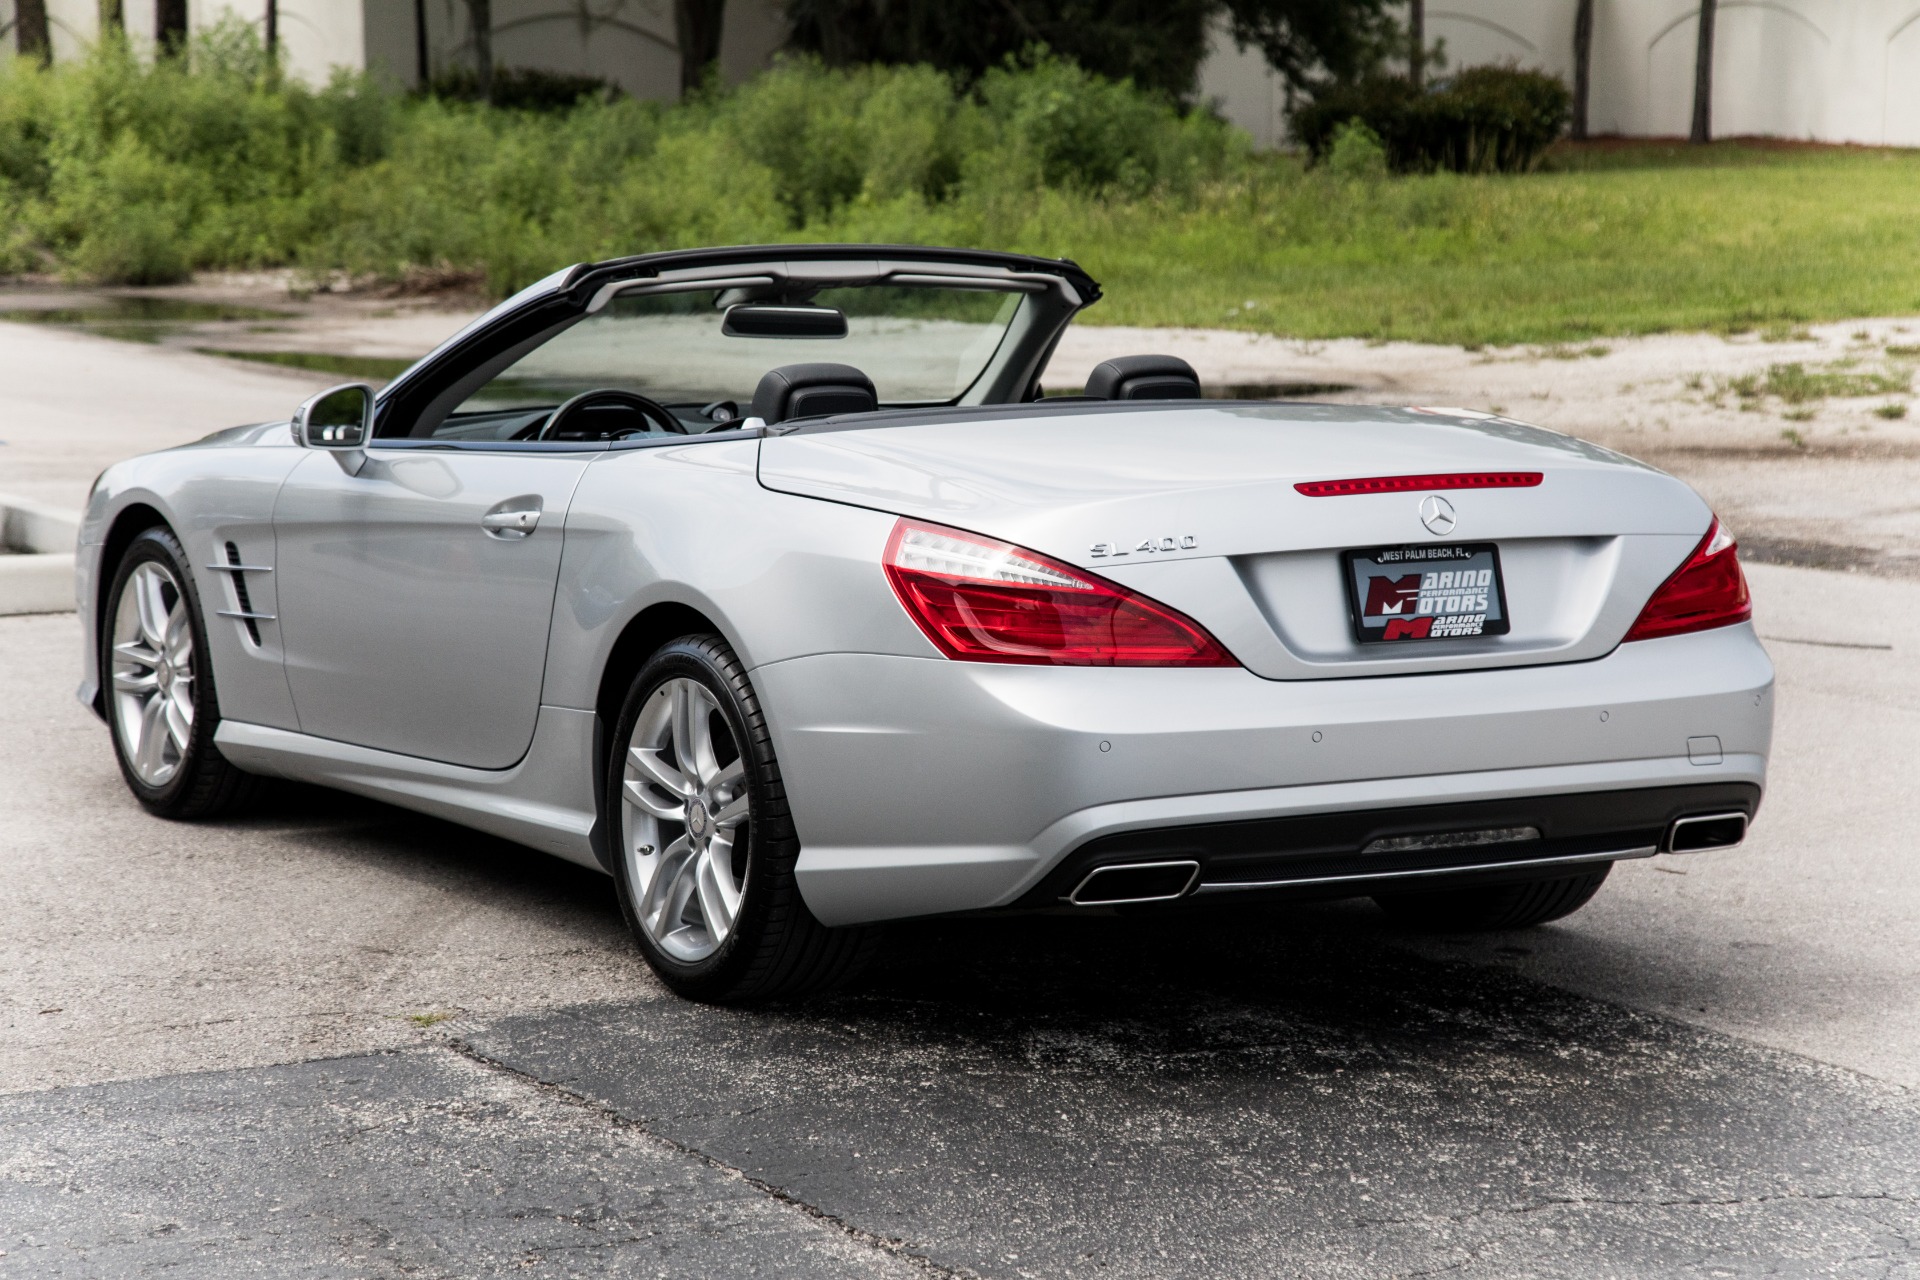 Used 2015 Mercedes Benz Sl Class Sl 400 For Sale 44900 Marino